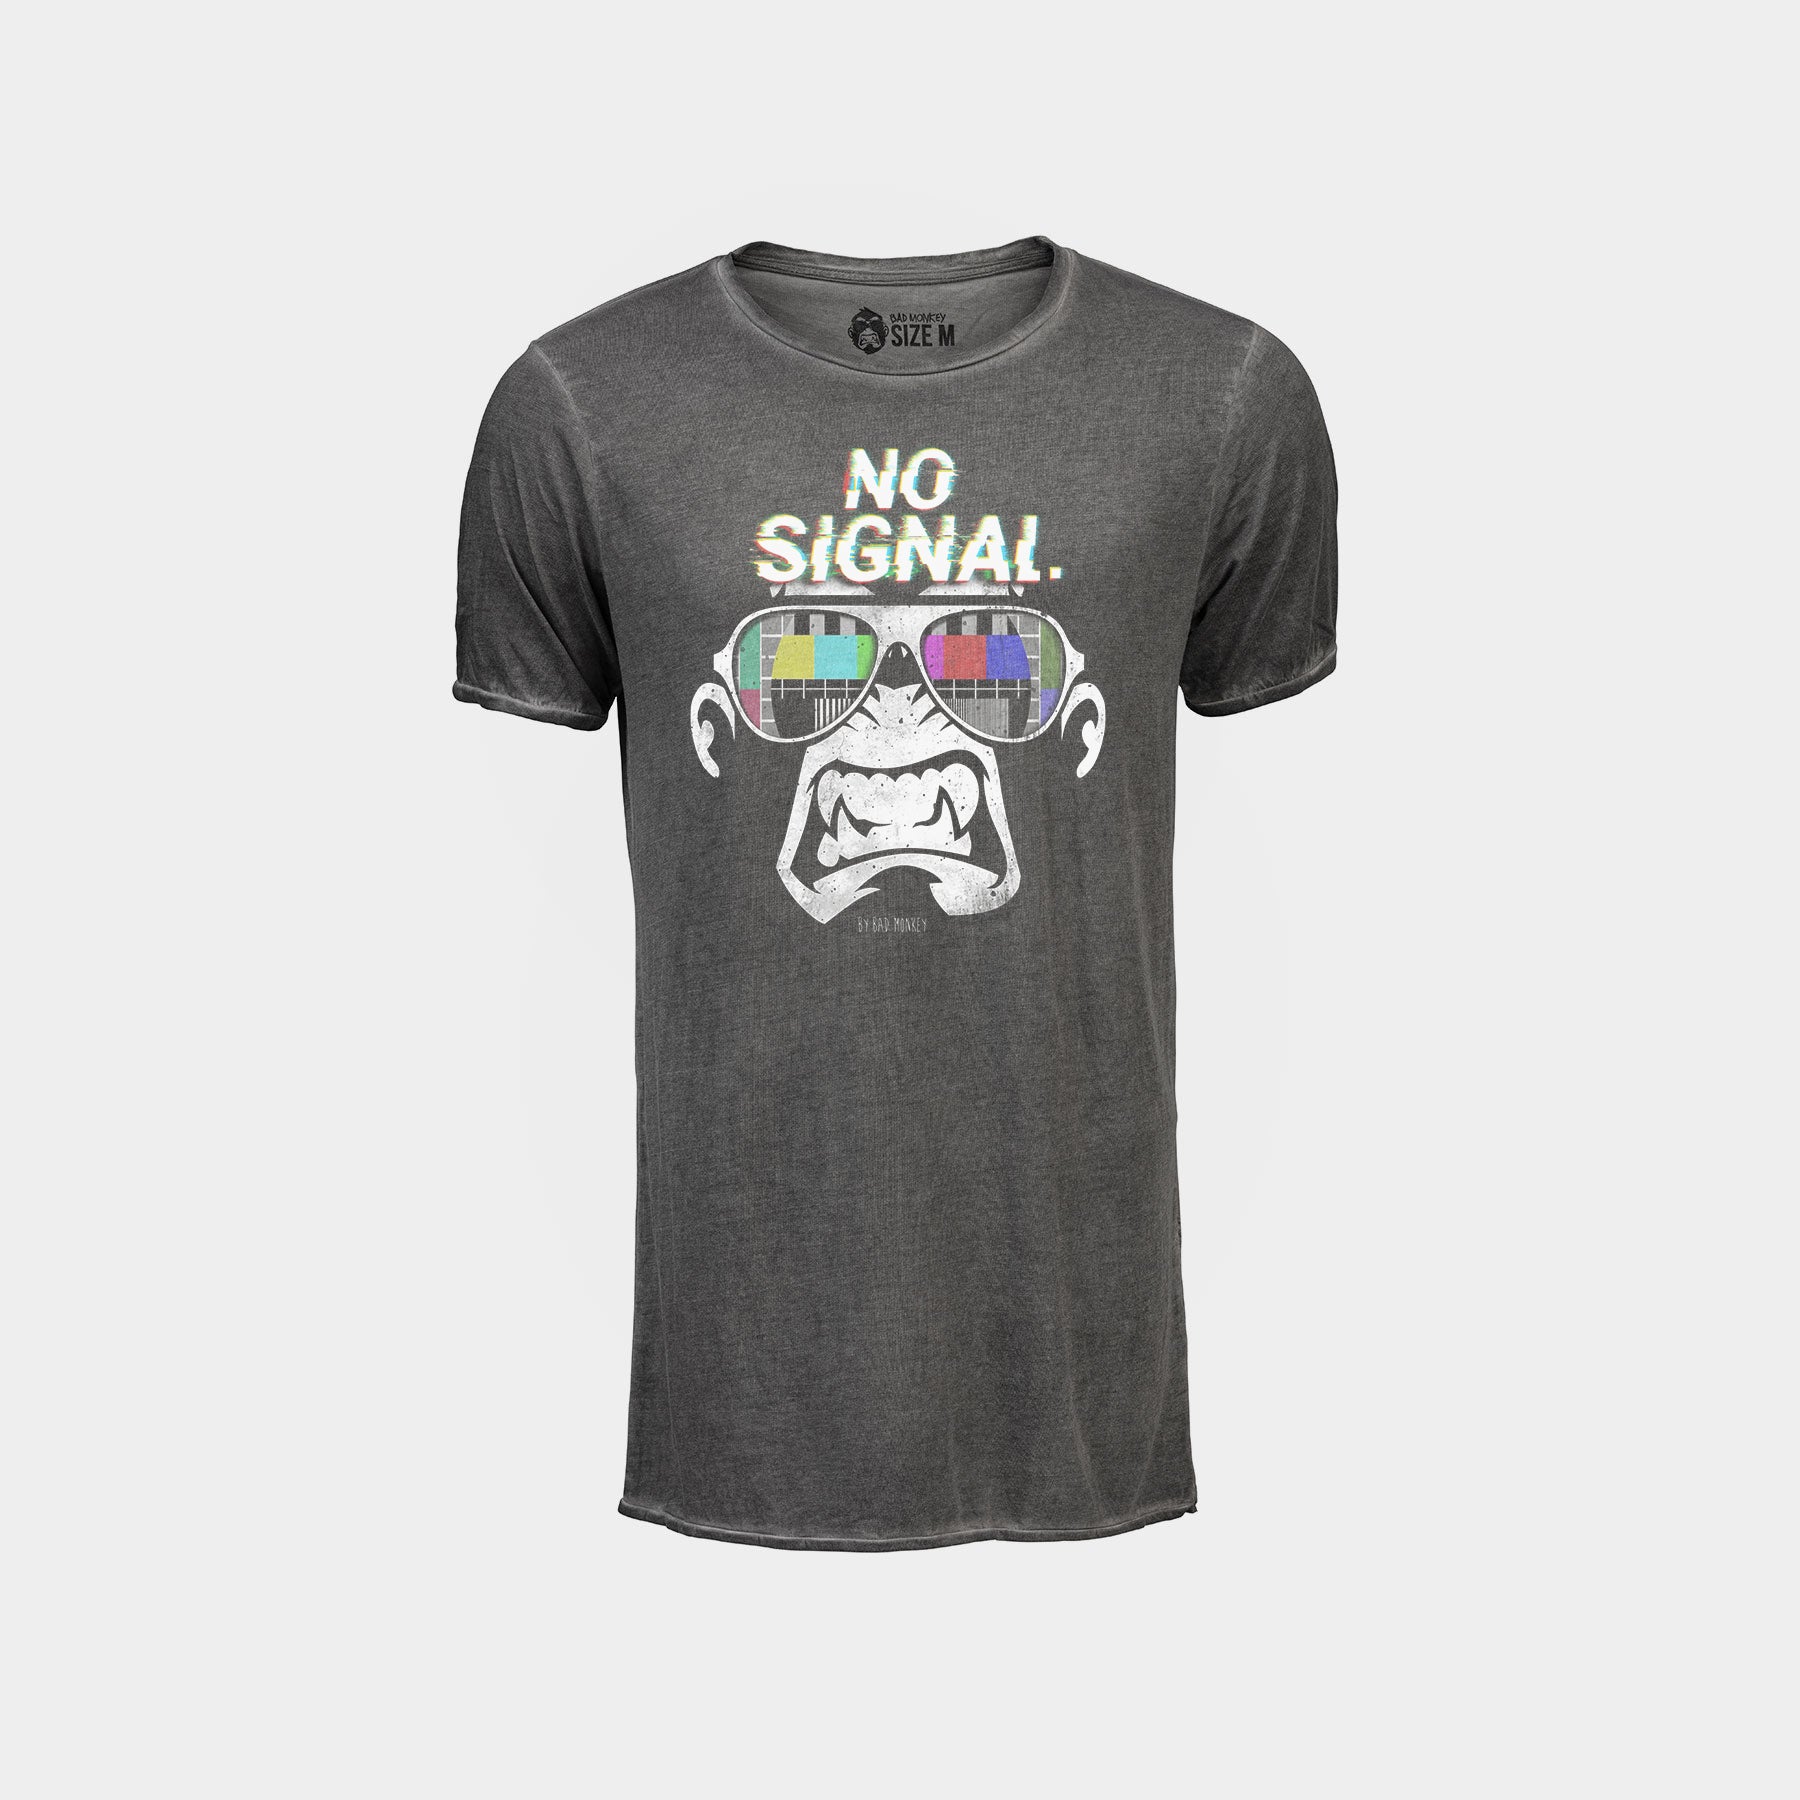 No Signal Grey Tshirt | Available only in S